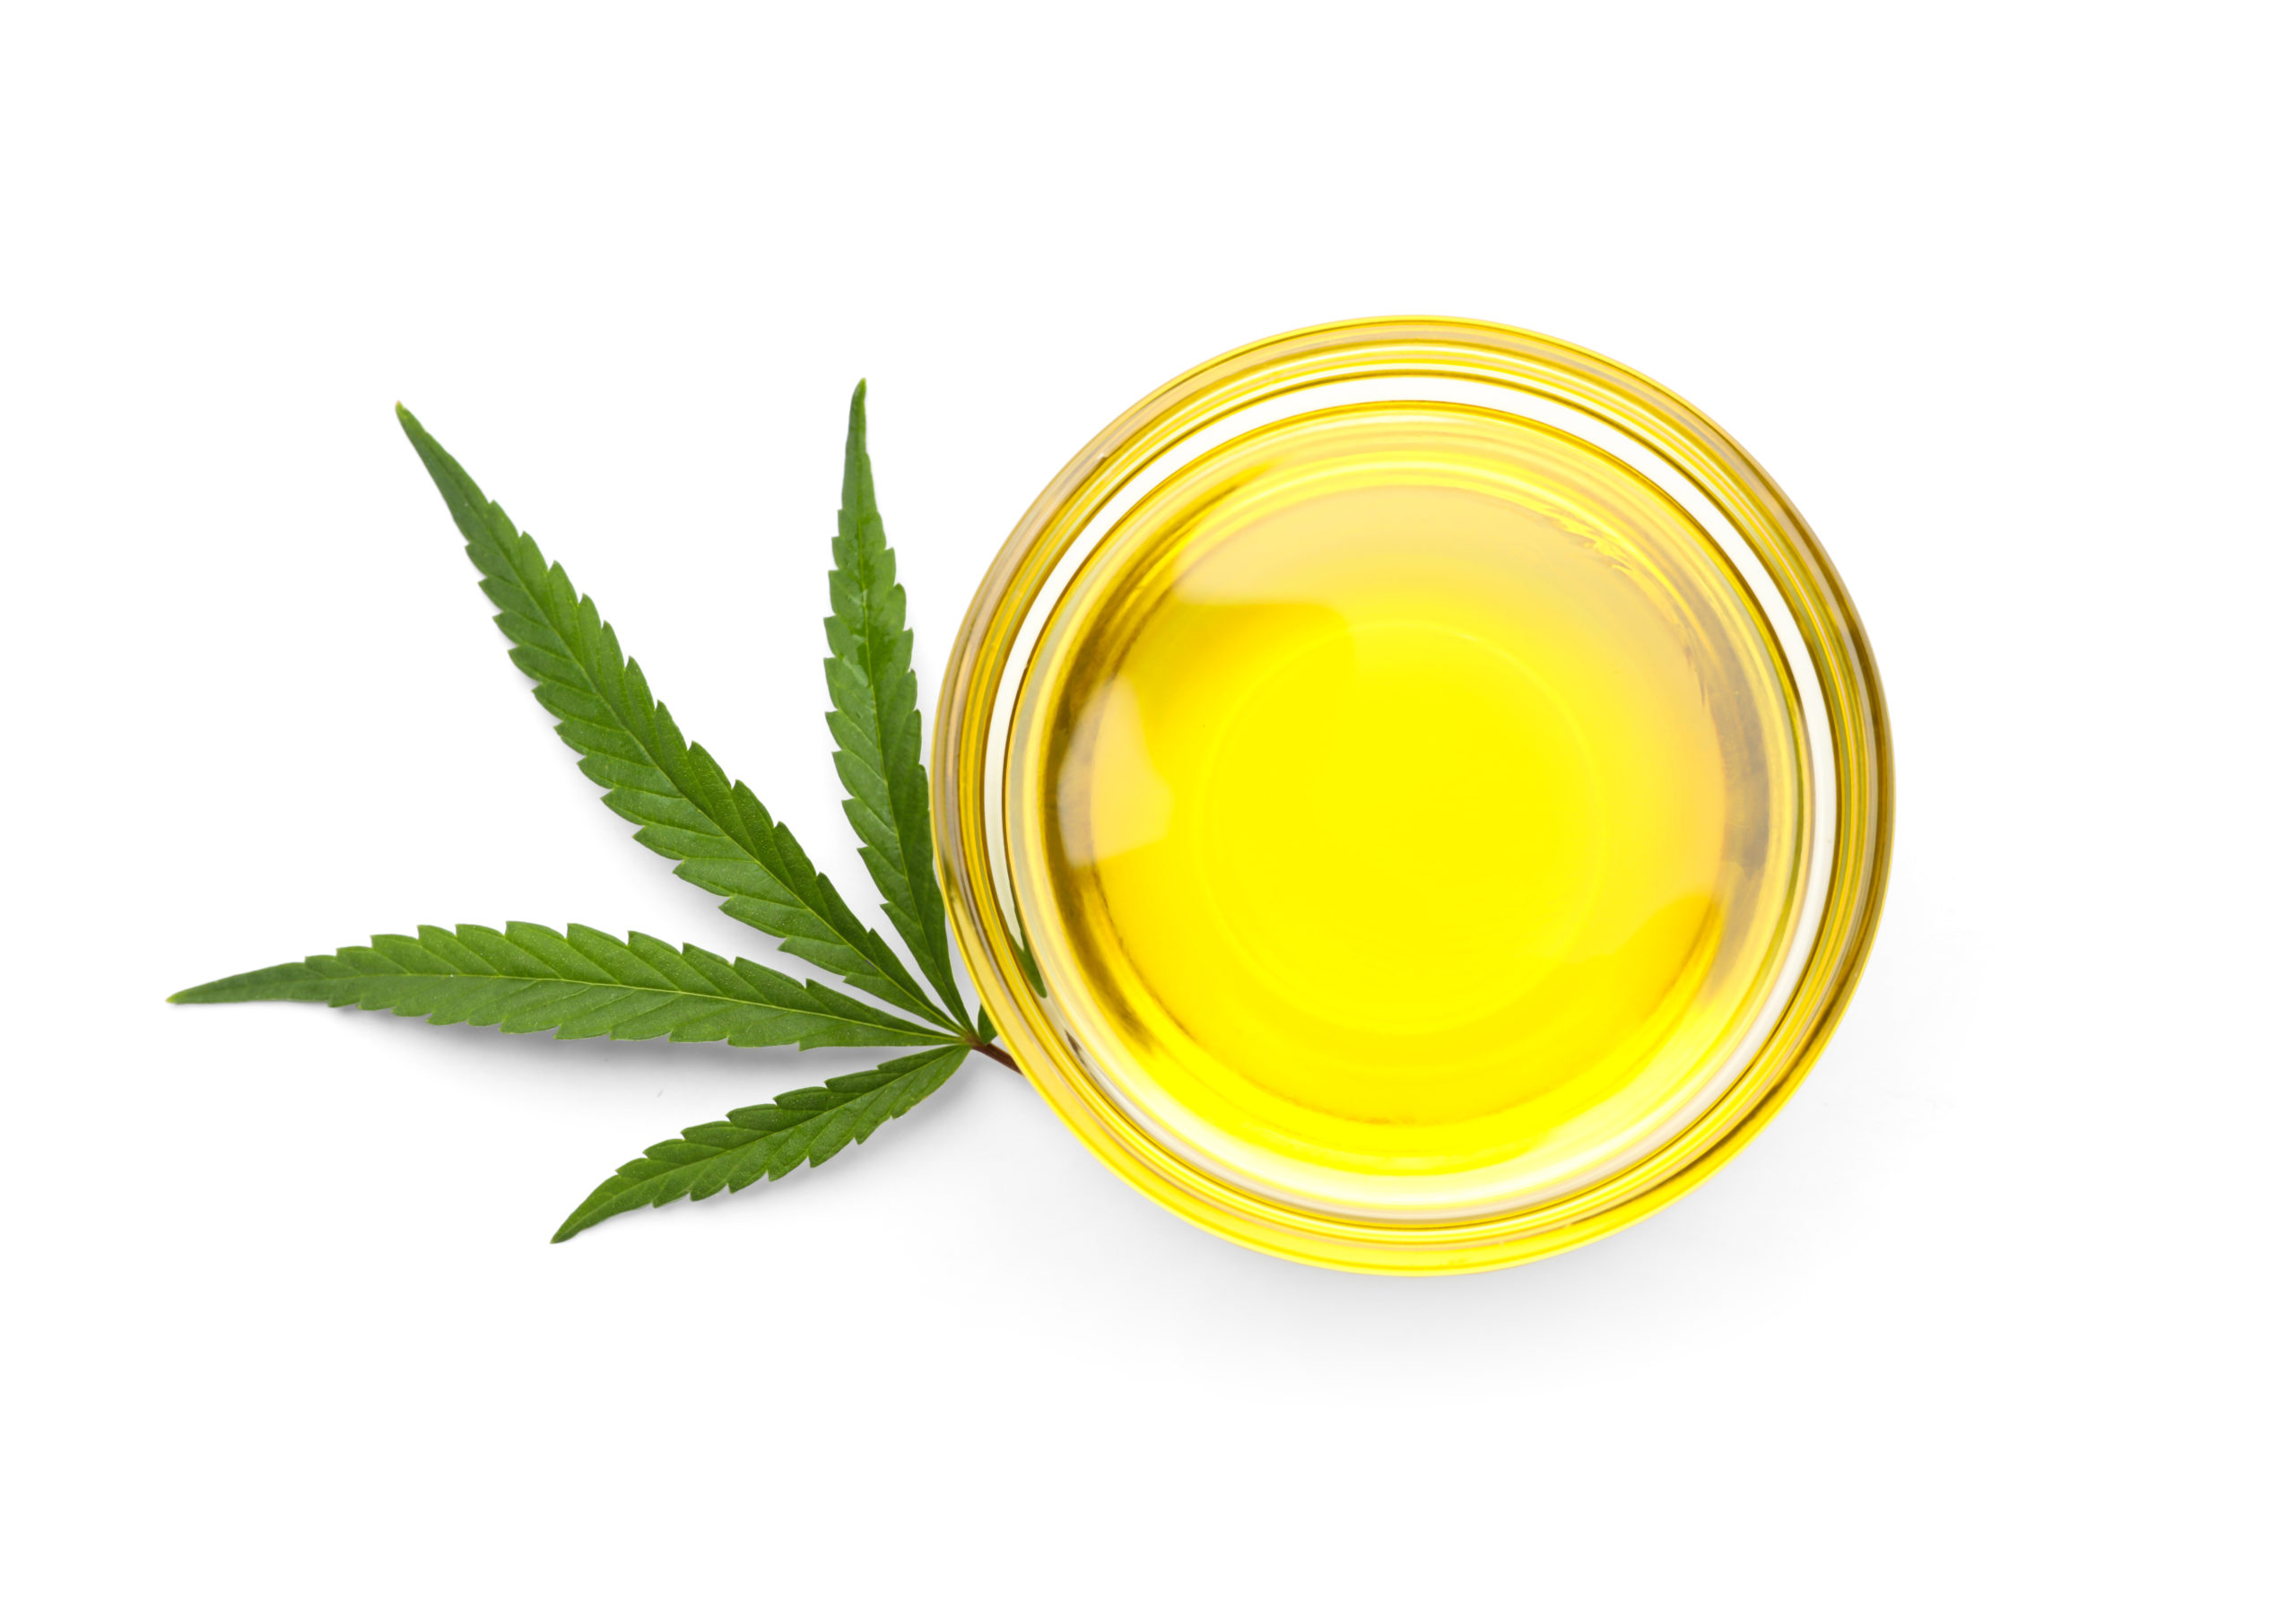 How to Make Cannabis Cooking Oil.